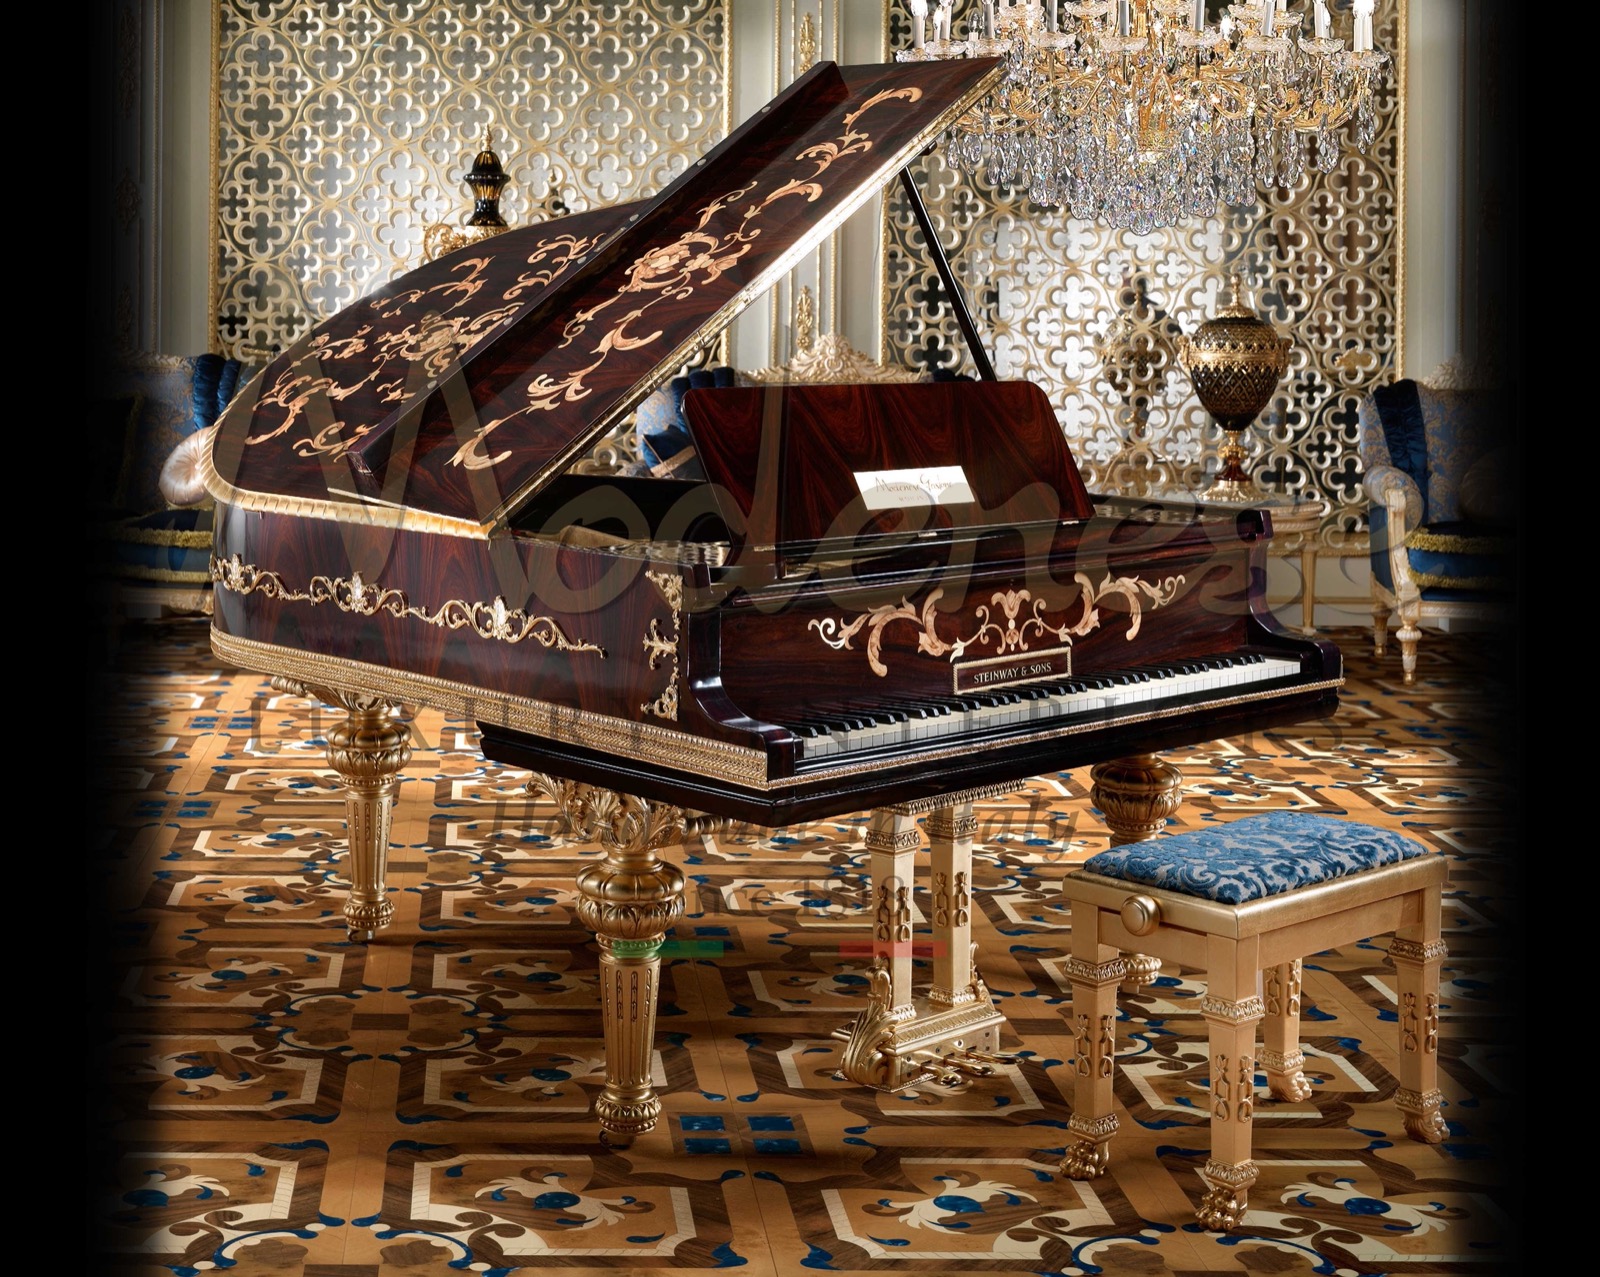 Production artisanale italienne artisanat restauration de piano luxe made in Italy meubles pose de feuille d'or